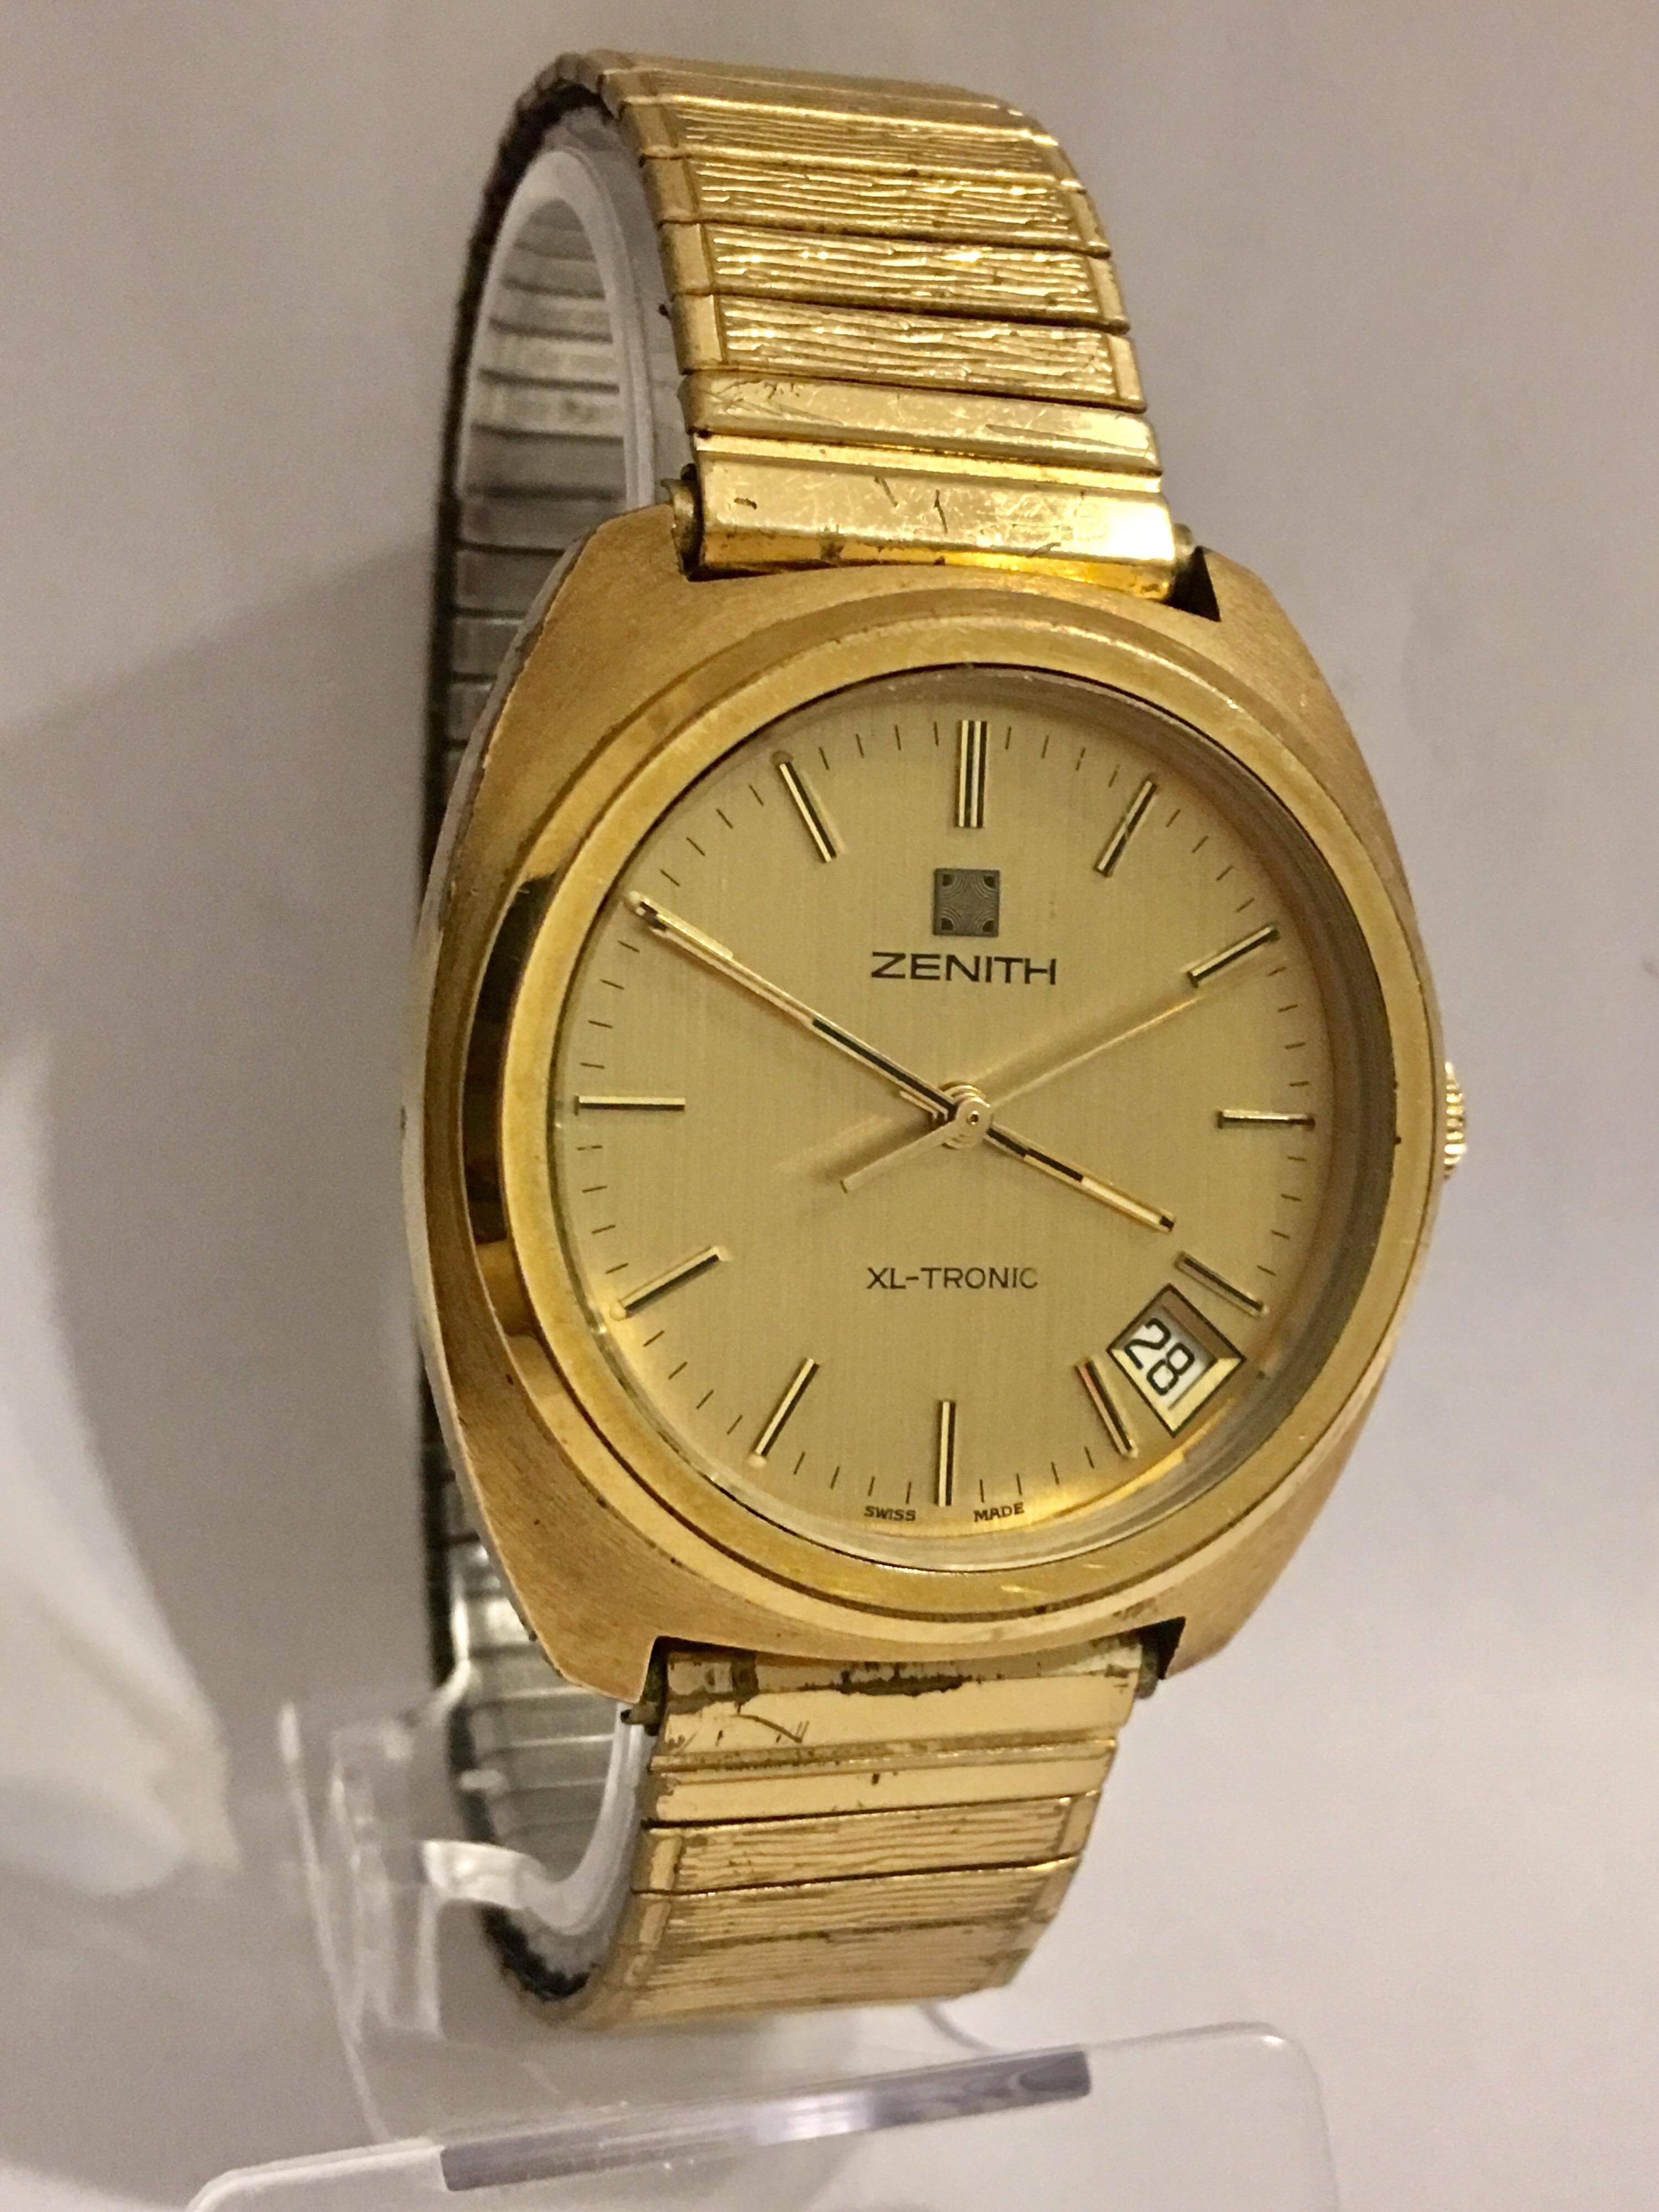 Vintage 1970s Zenith XL-Tronic Gold-Plated/ Stainless Steel Men’s Watch For Sale 8